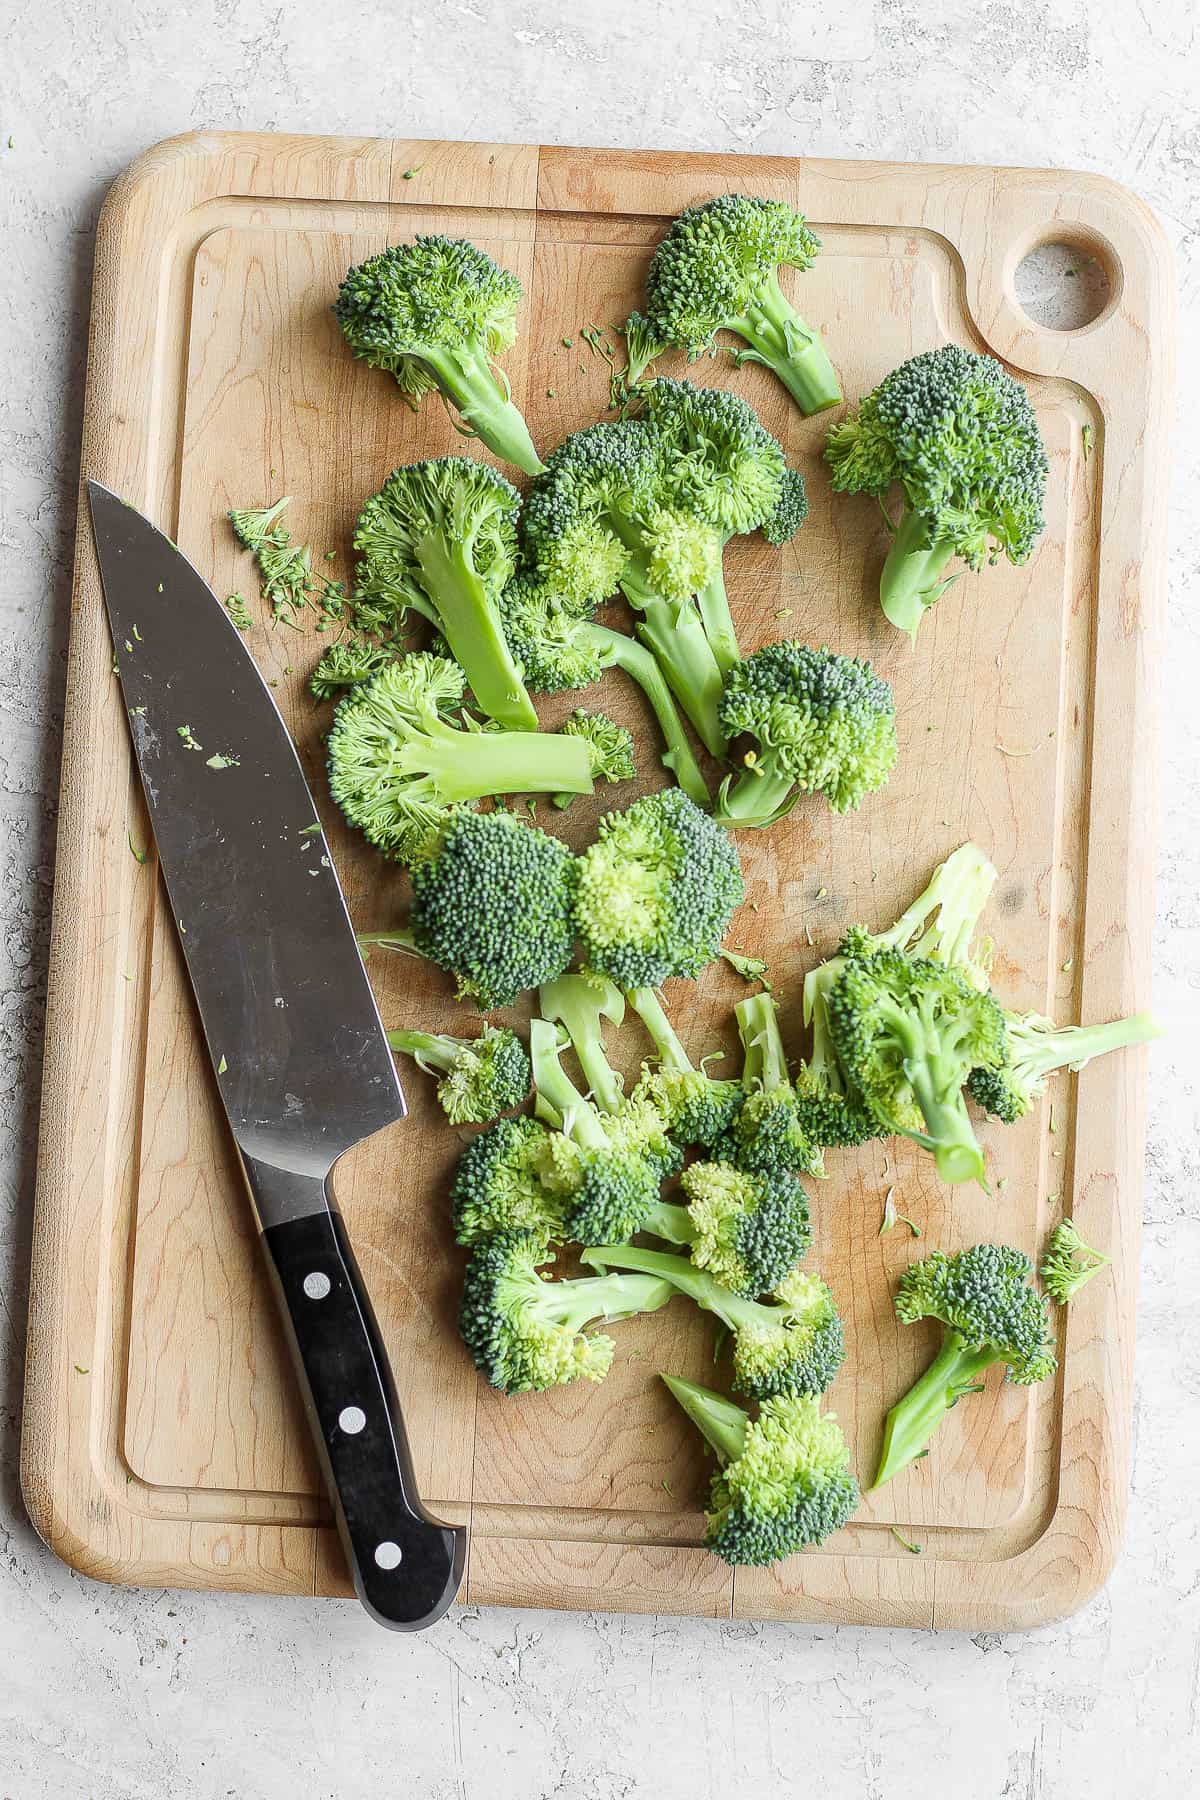 Broccoli florets on cutting board with knife